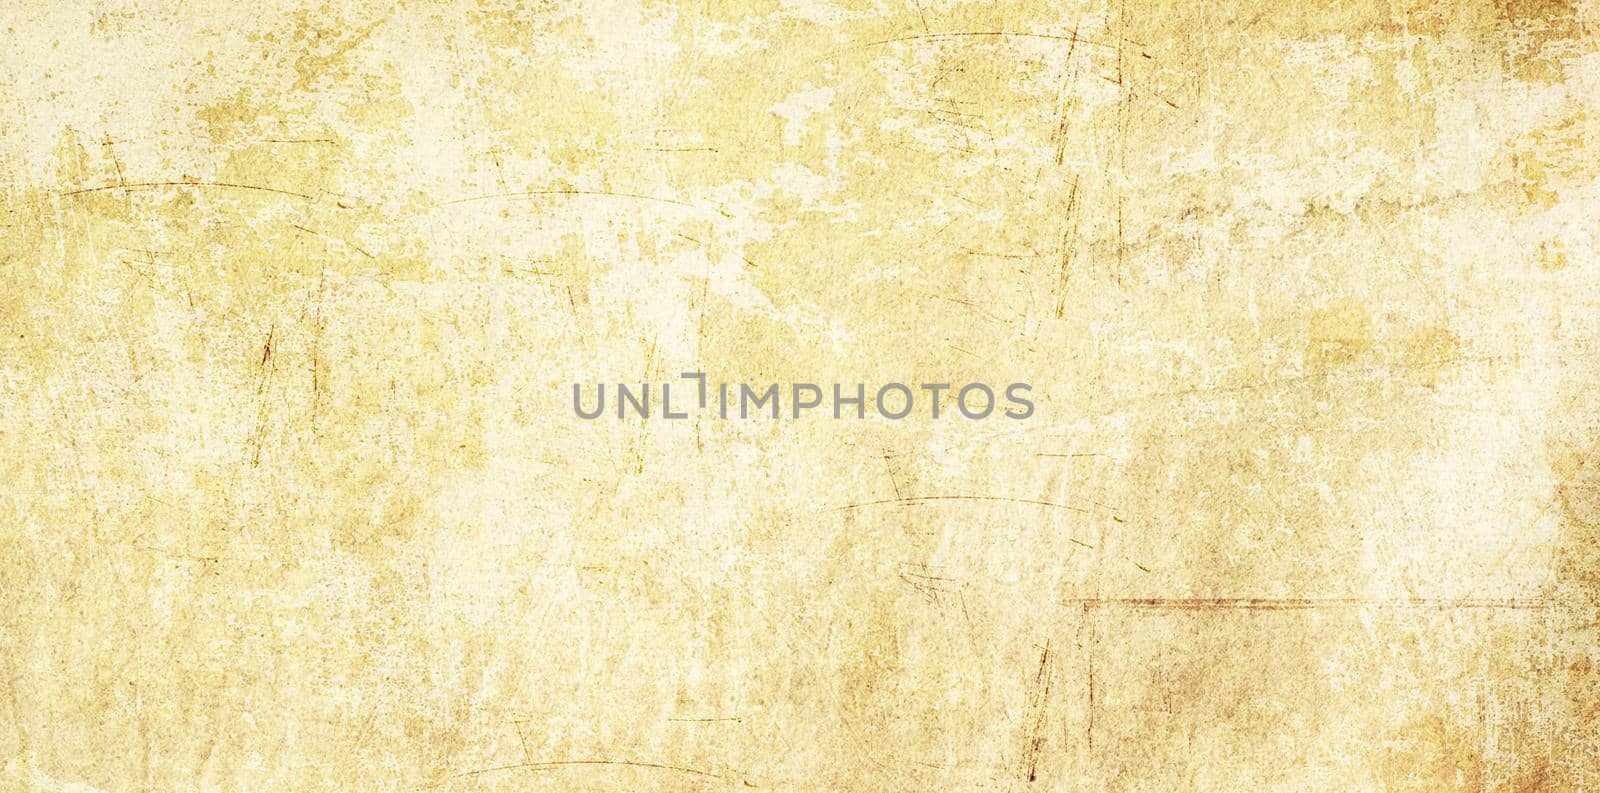 Trendy  background. illustration for wrappers, wallpapers, postcards